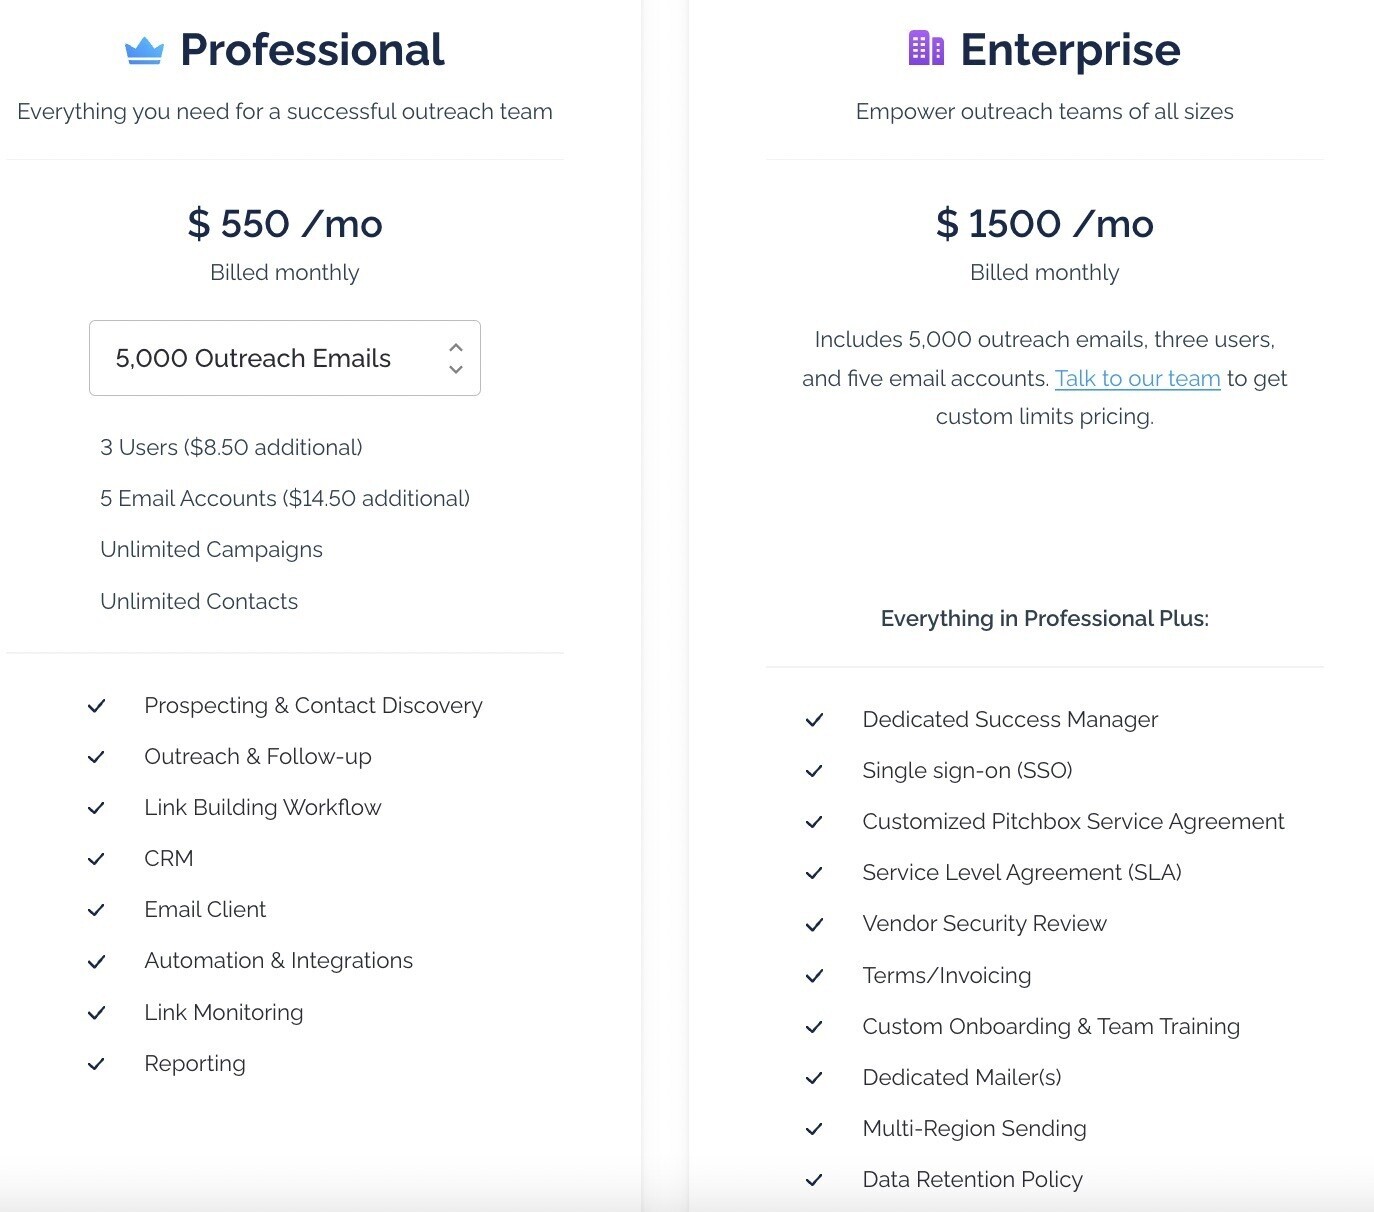 Pitchbox’s pricing page showing features and prices for Professional and Enterprise plans